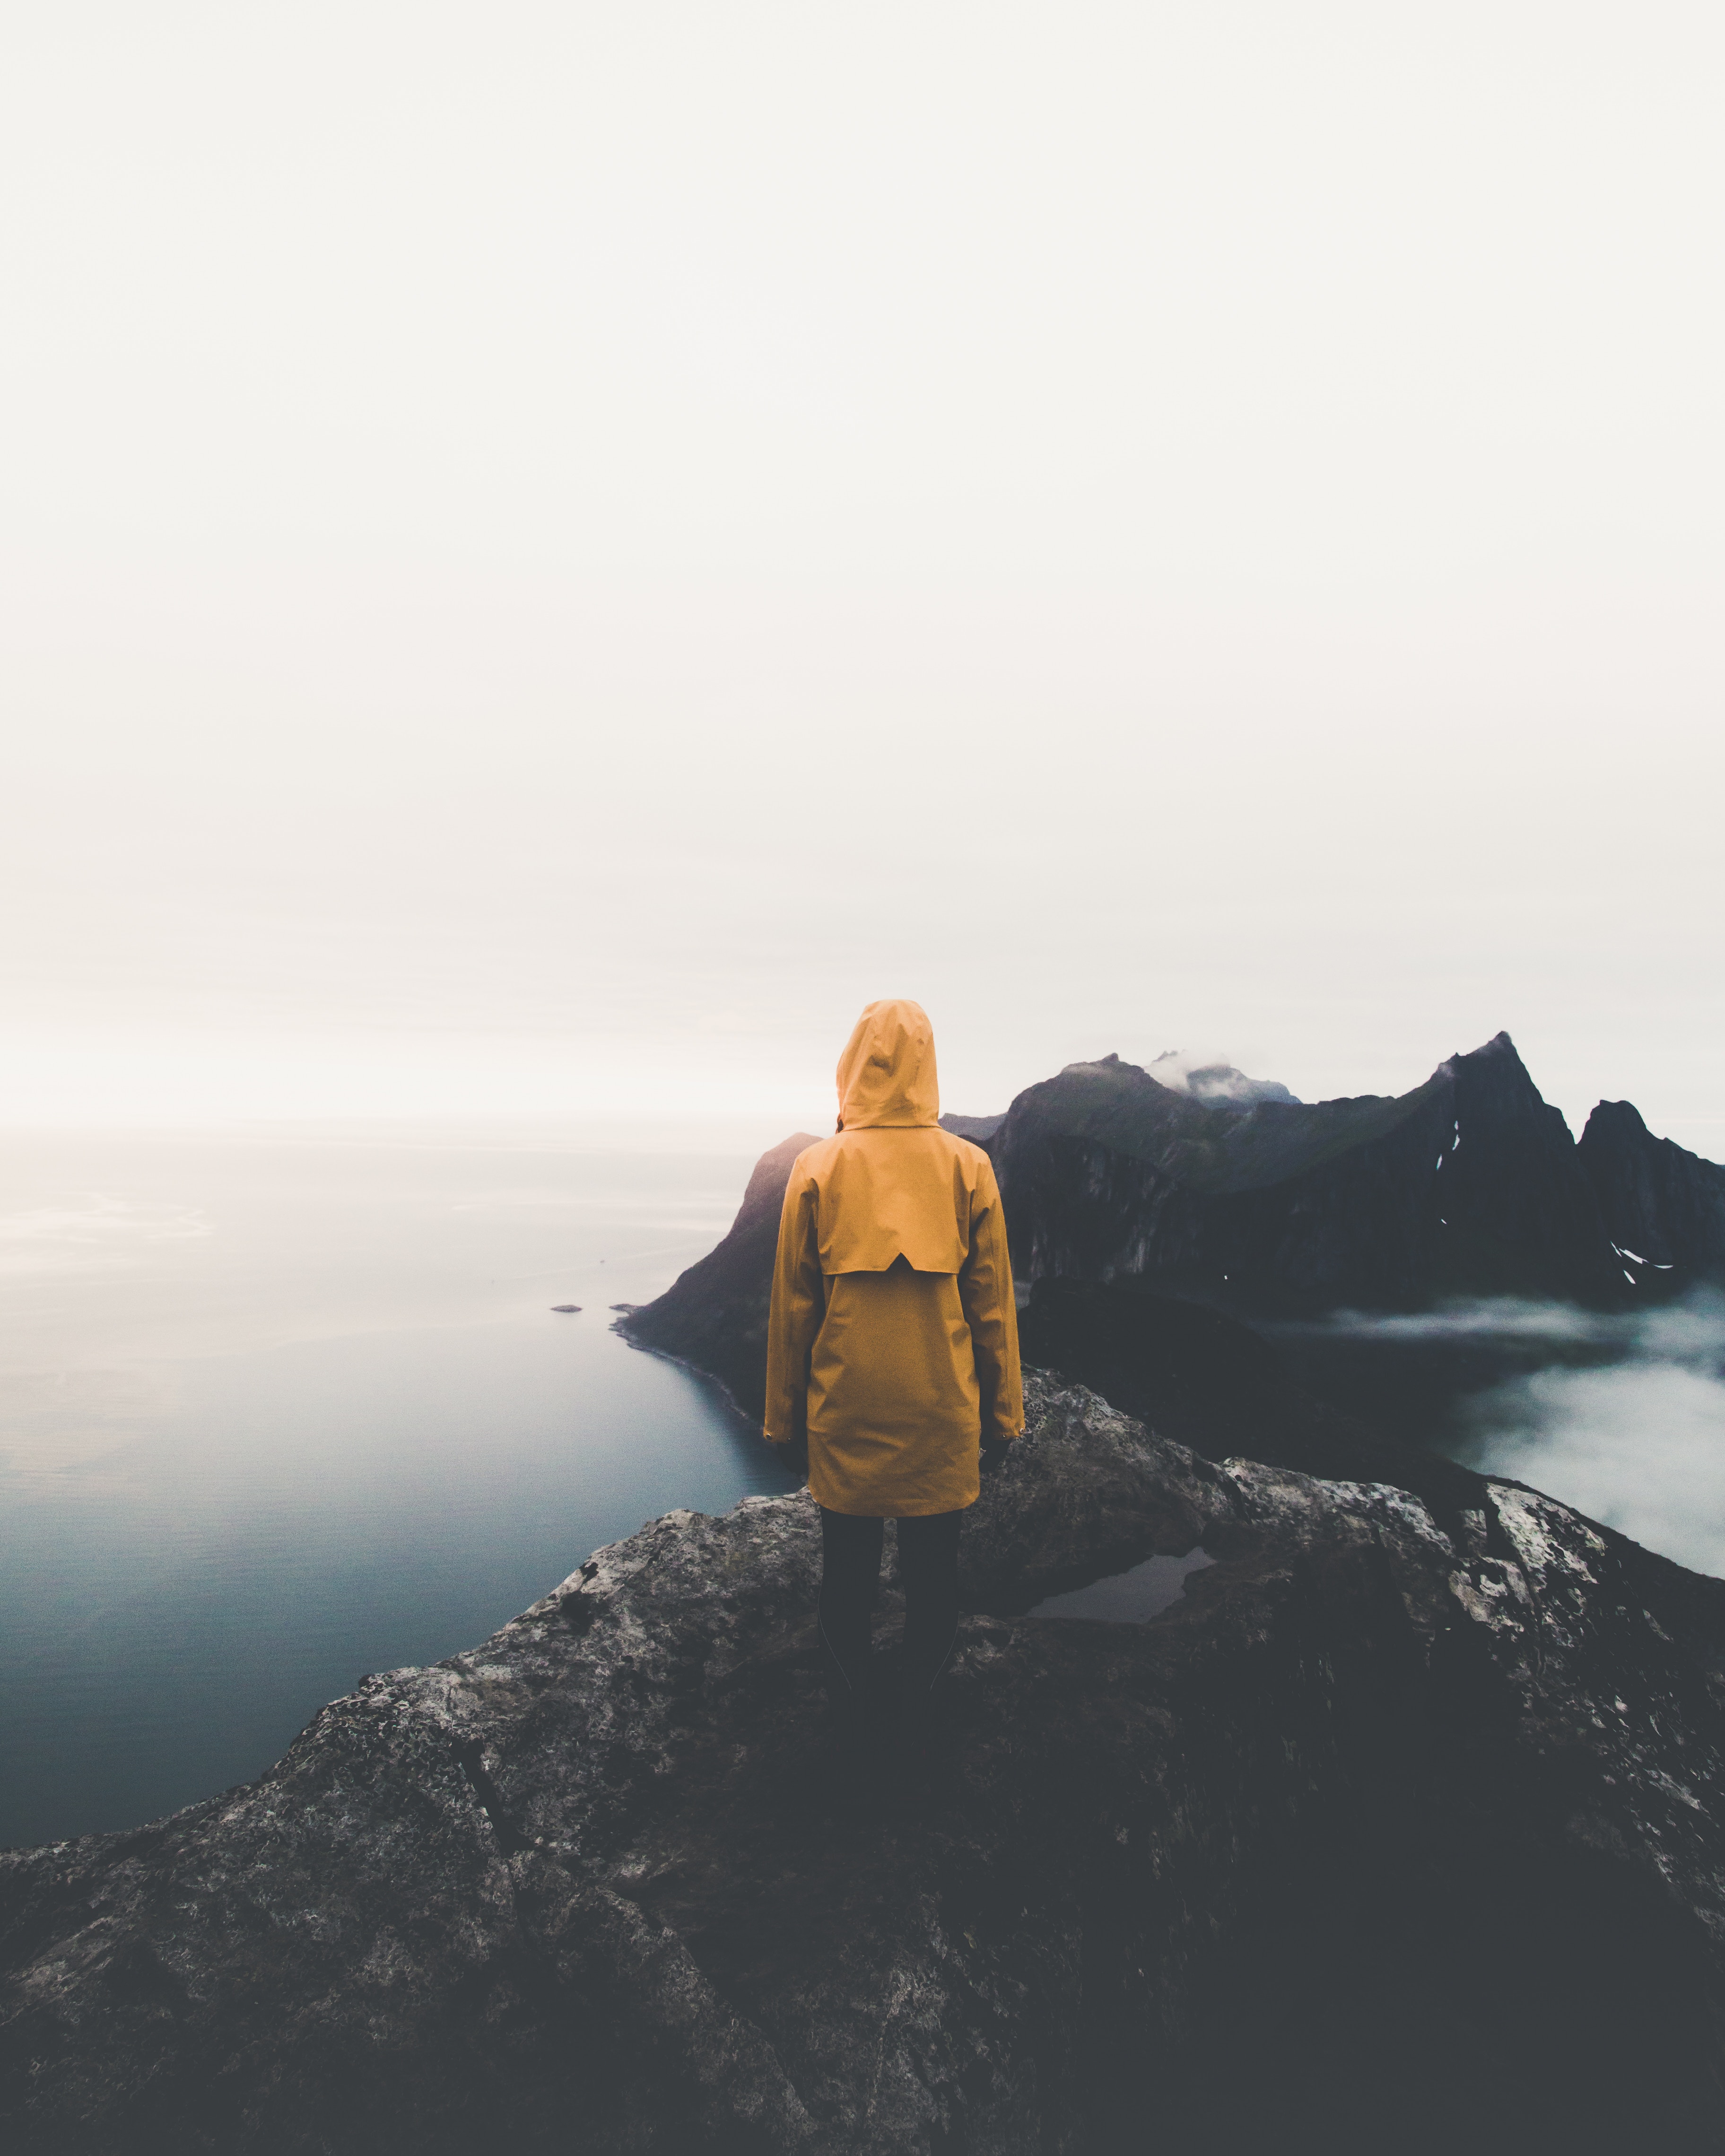 loneliness, privacy, nature, mountains, seclusion, fog, norway, hood, senja Full HD